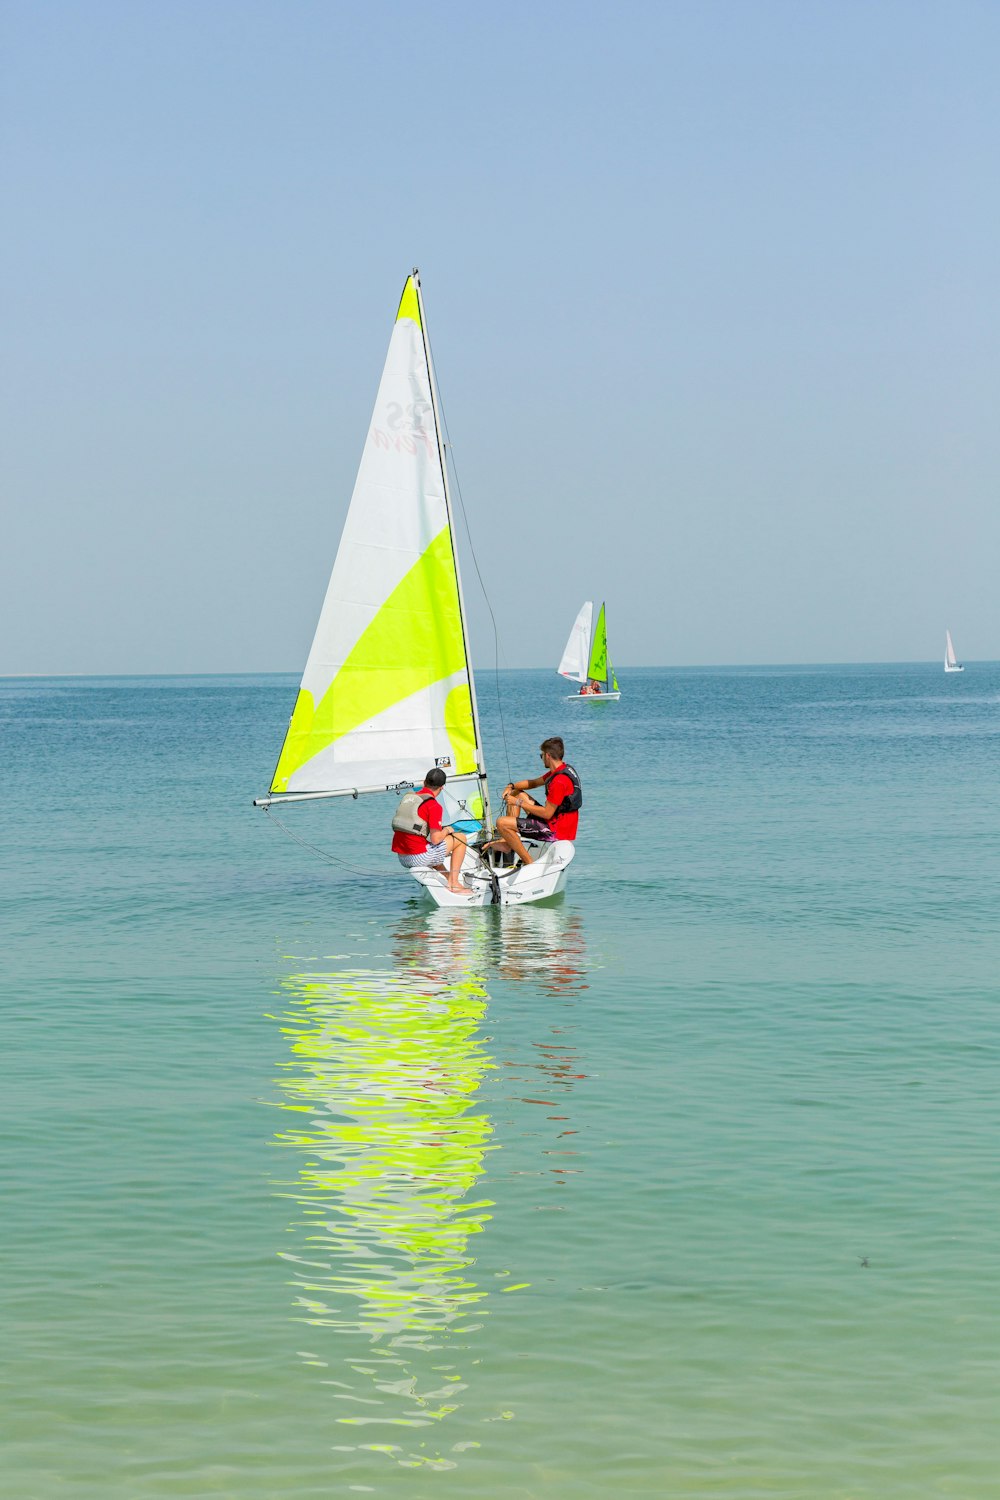 2 people riding on boat on sea during daytime